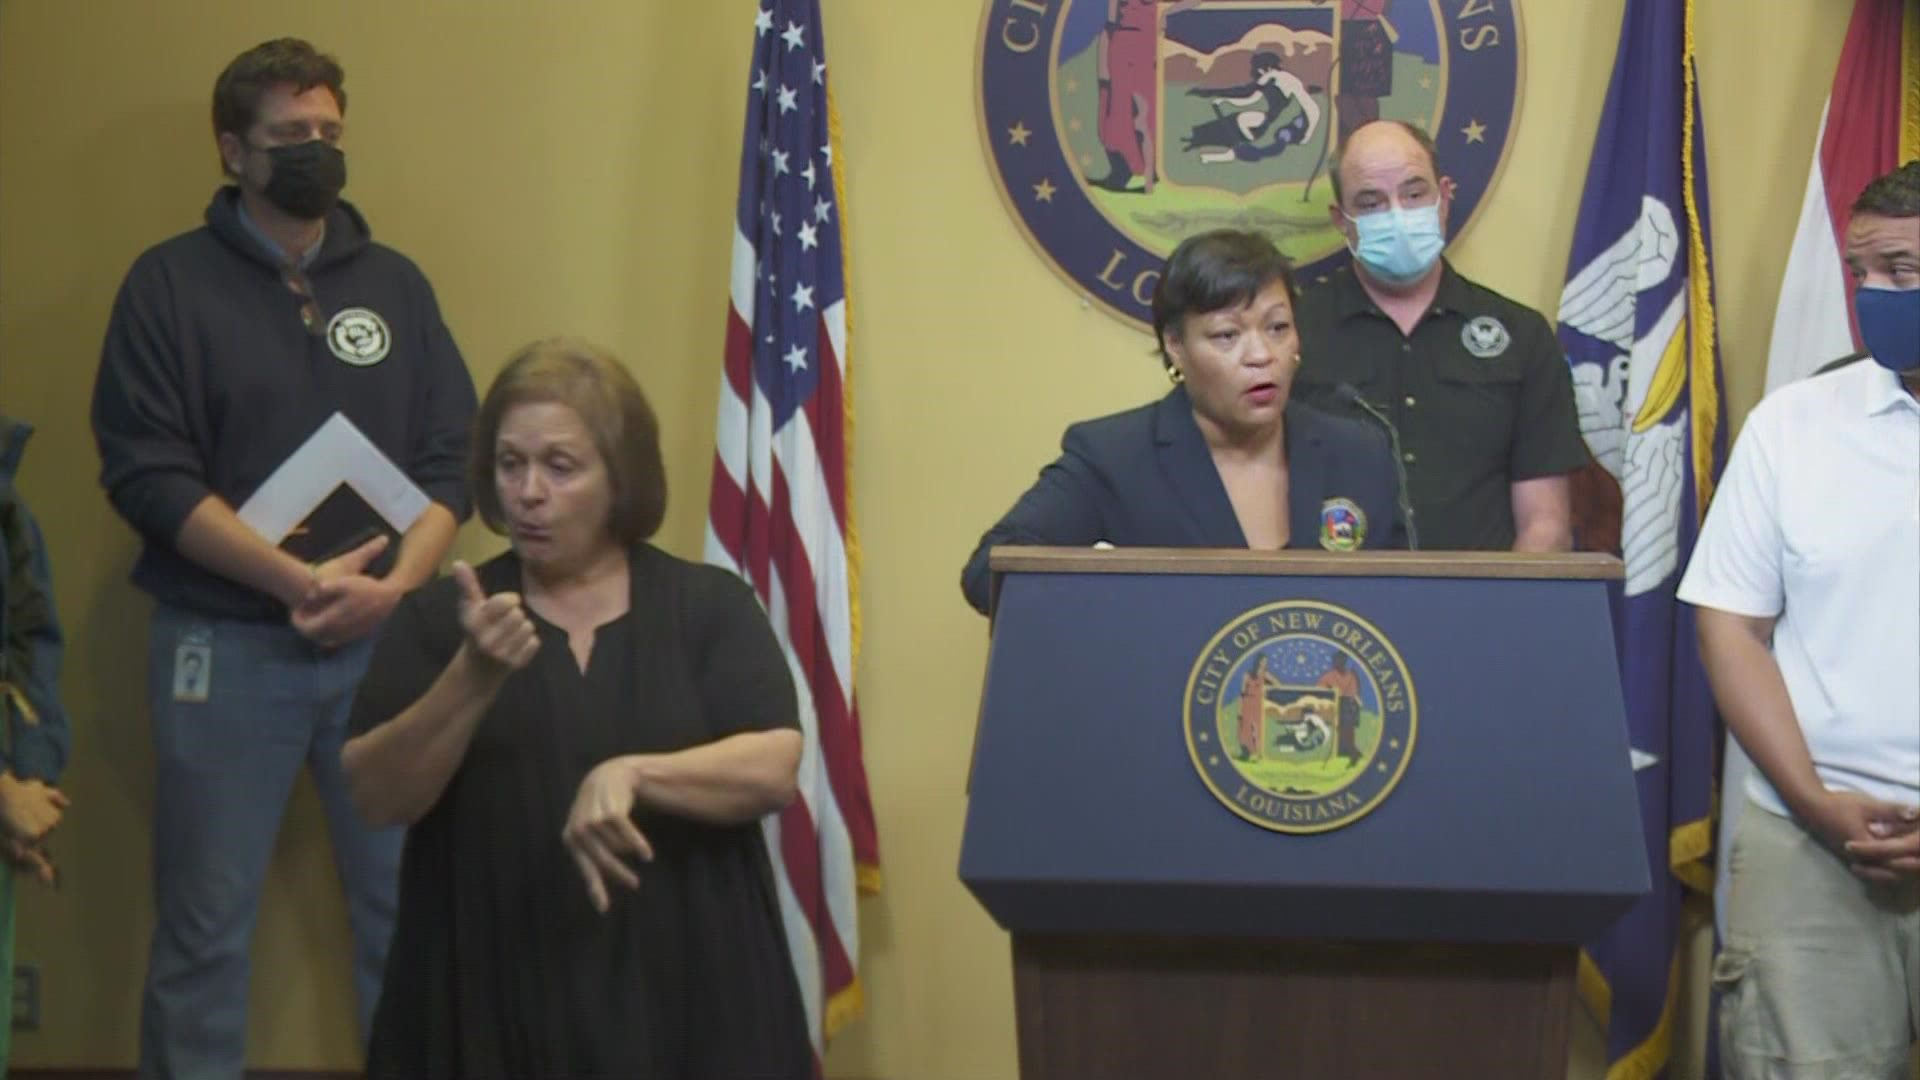 Mayor LaToya Cantrell and Councilwoman Kristin Palmer blast the owners of the senior living residences where hundreds were evacuated and 5 died.